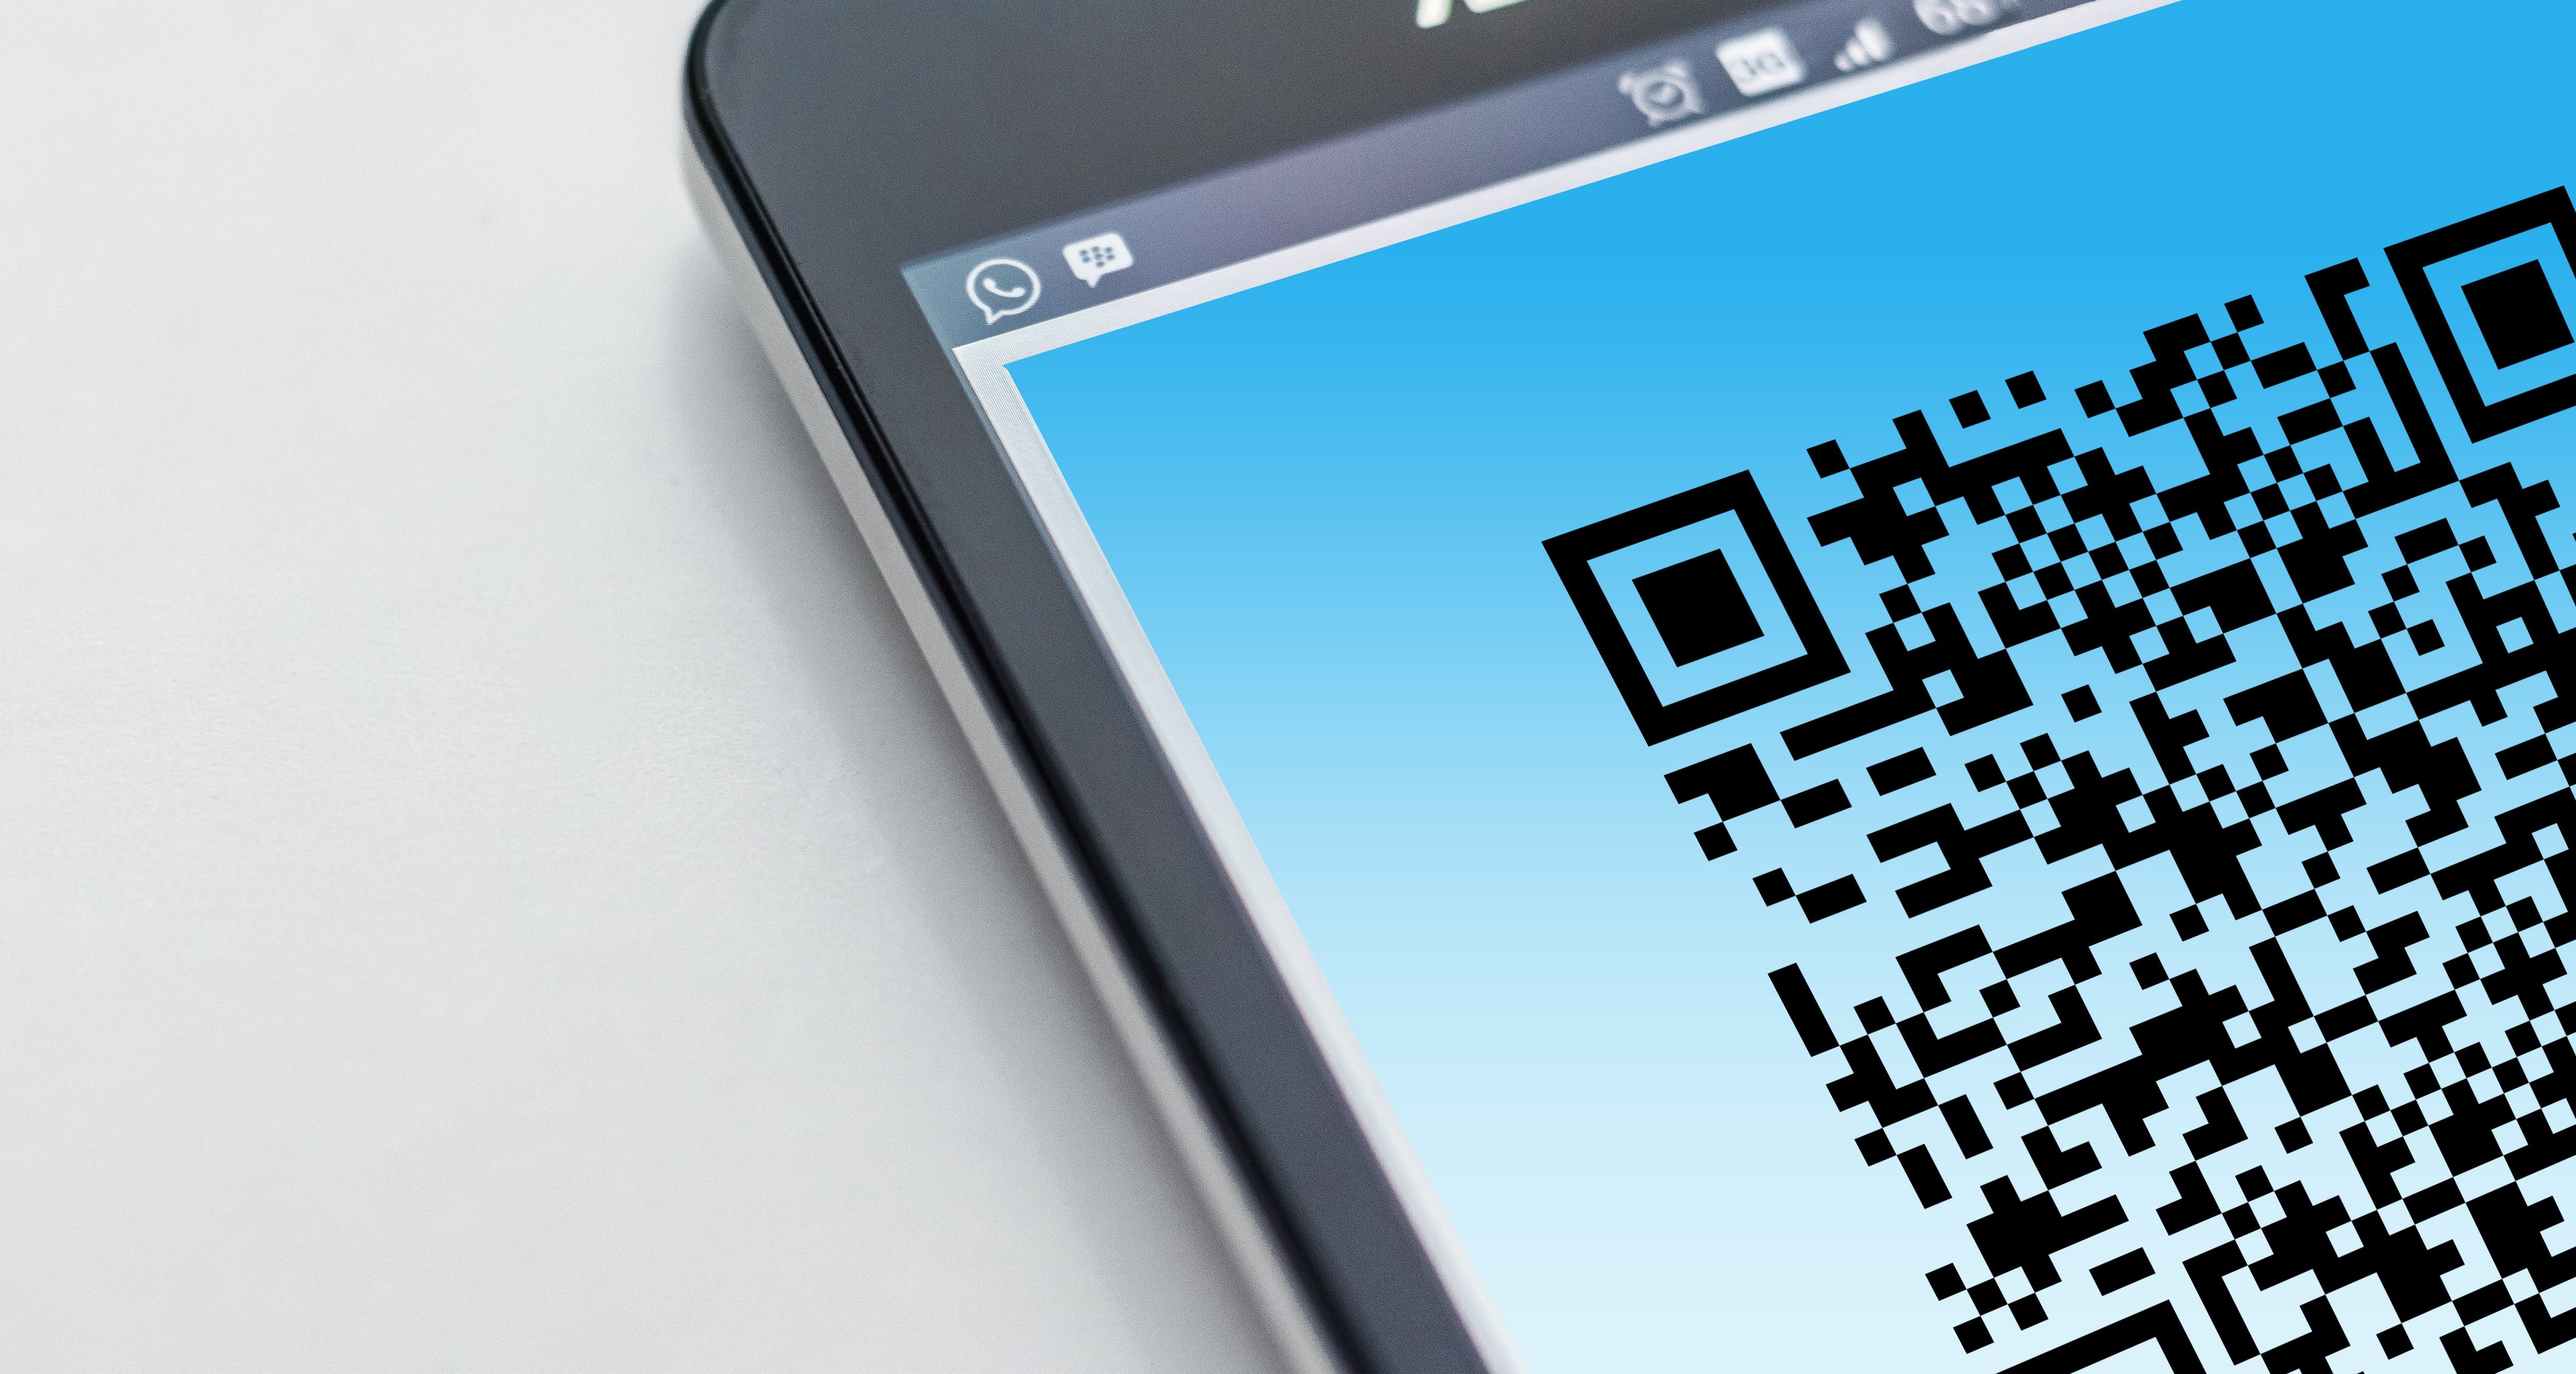 Indonesia to implement QR Code standards by second half of the year